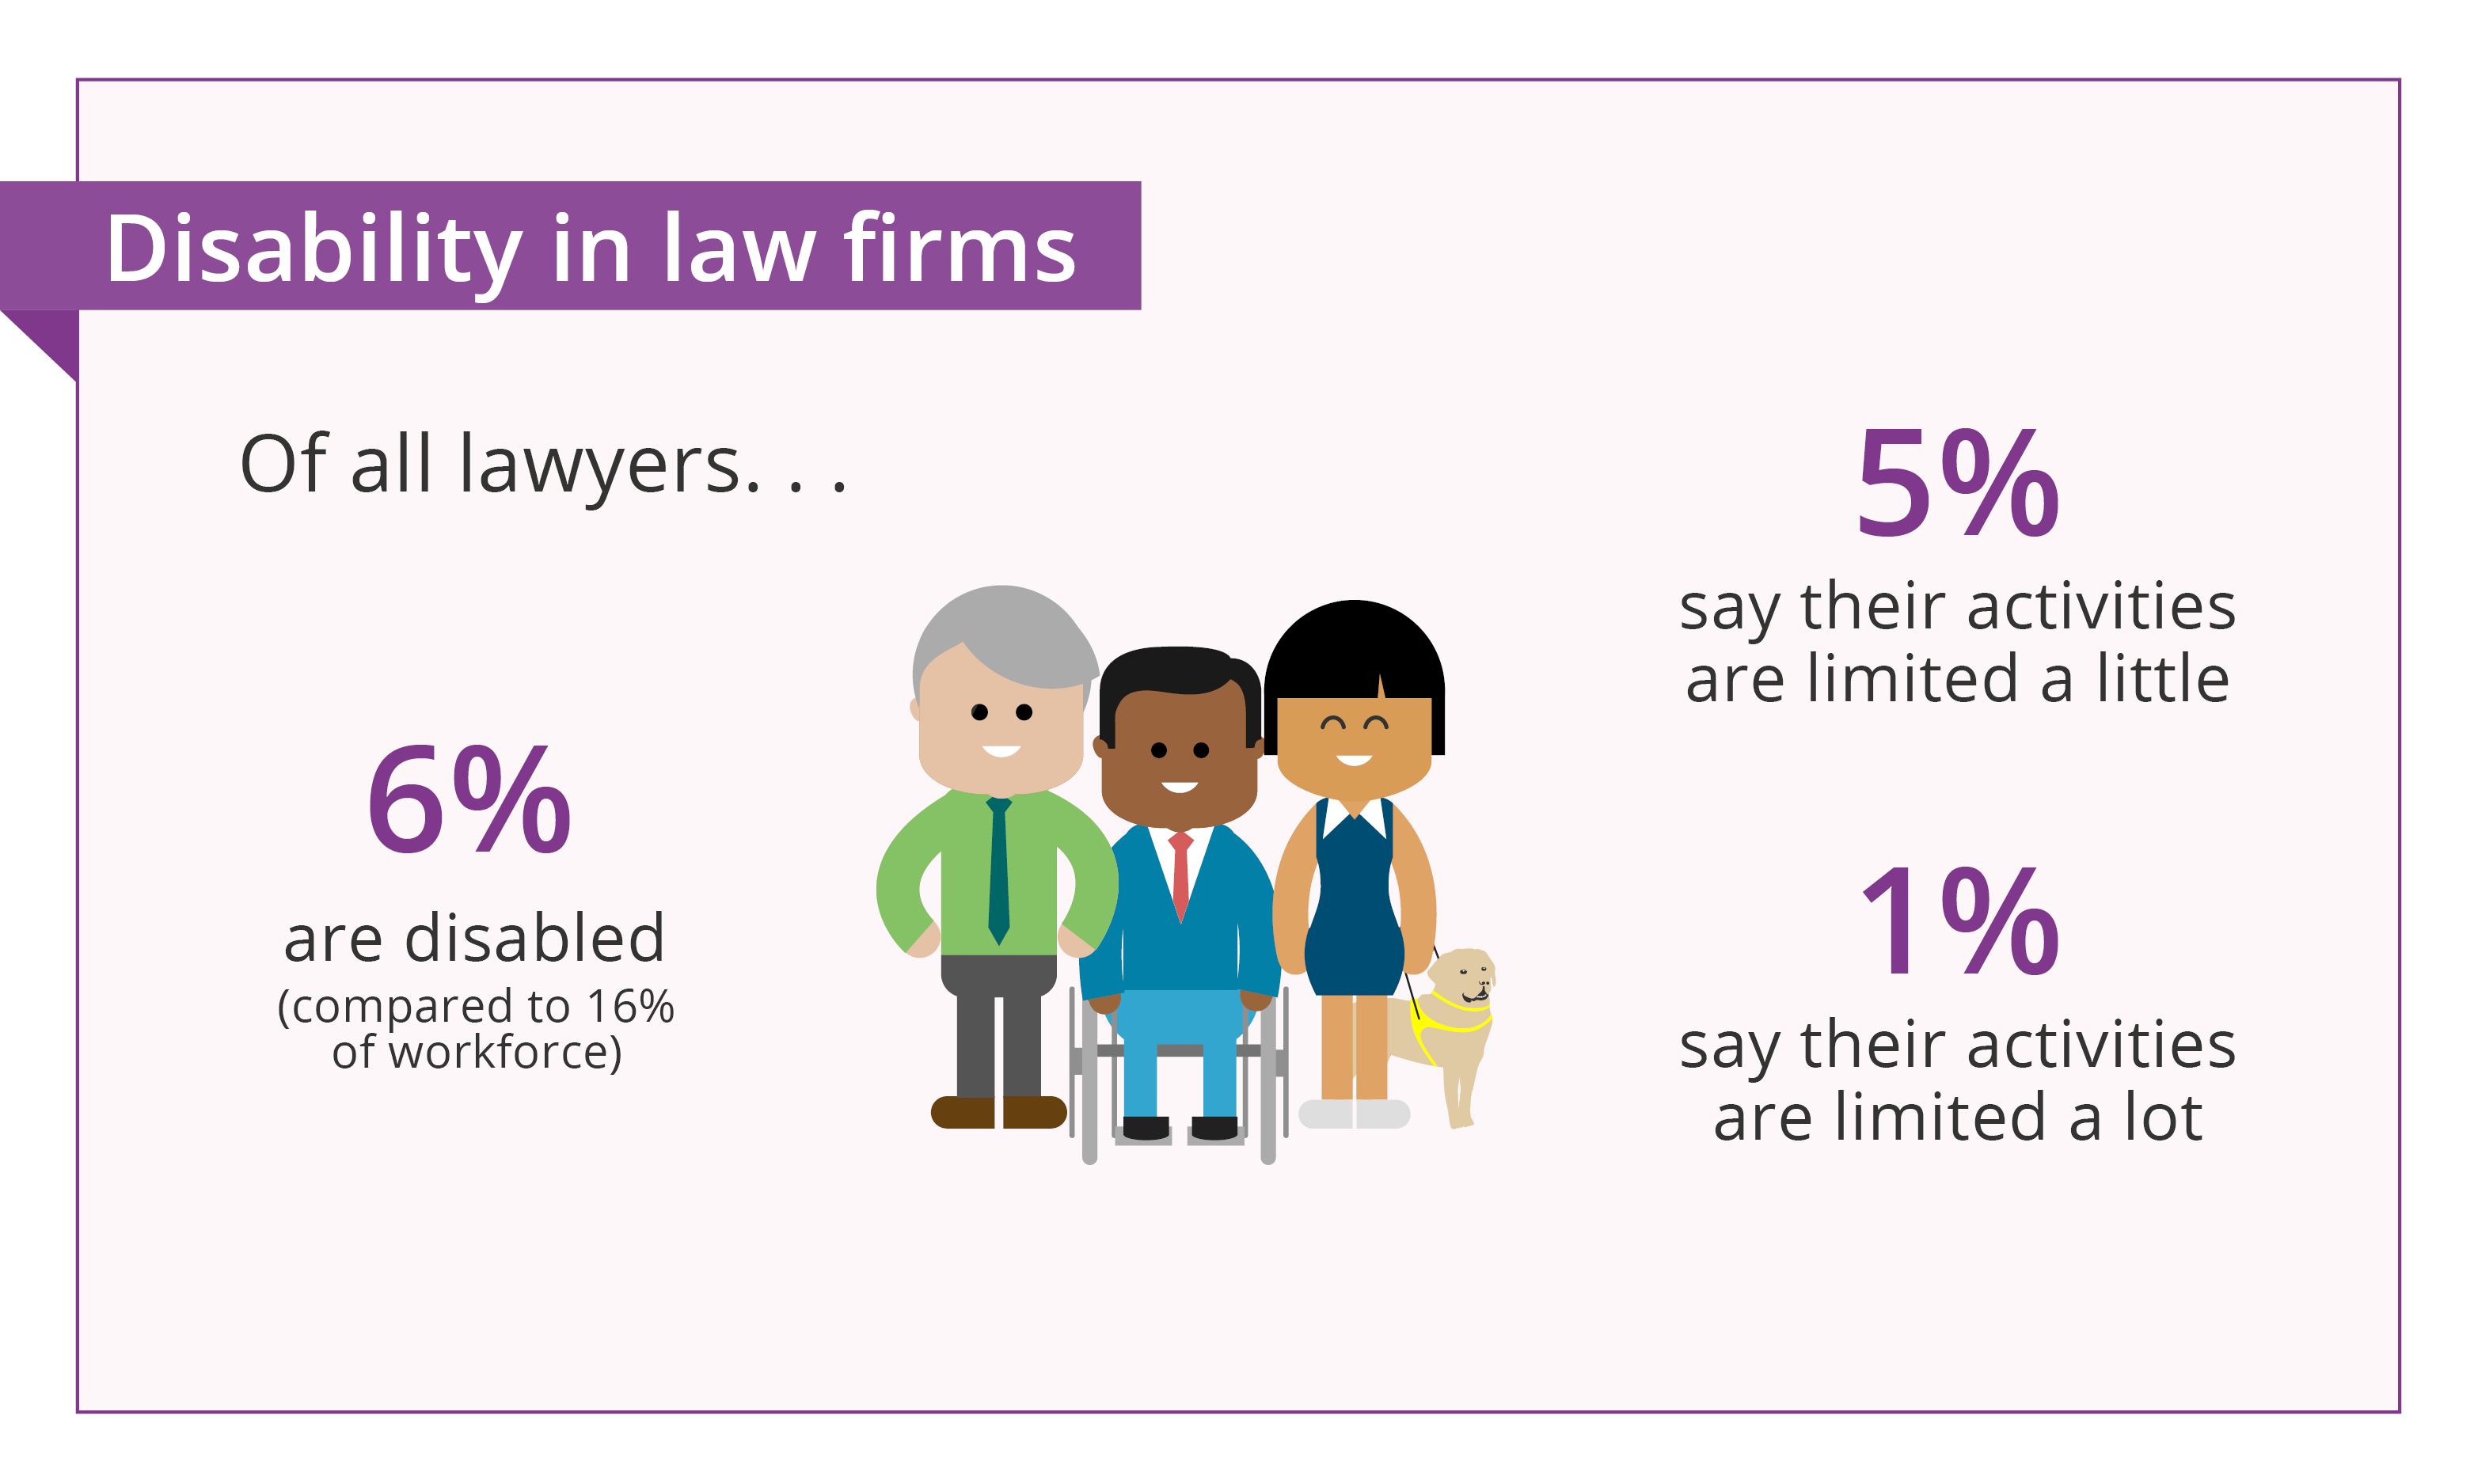 Of all lawyers 6% disabled lawyers 5% activities limited a little 1% activities limited a lot